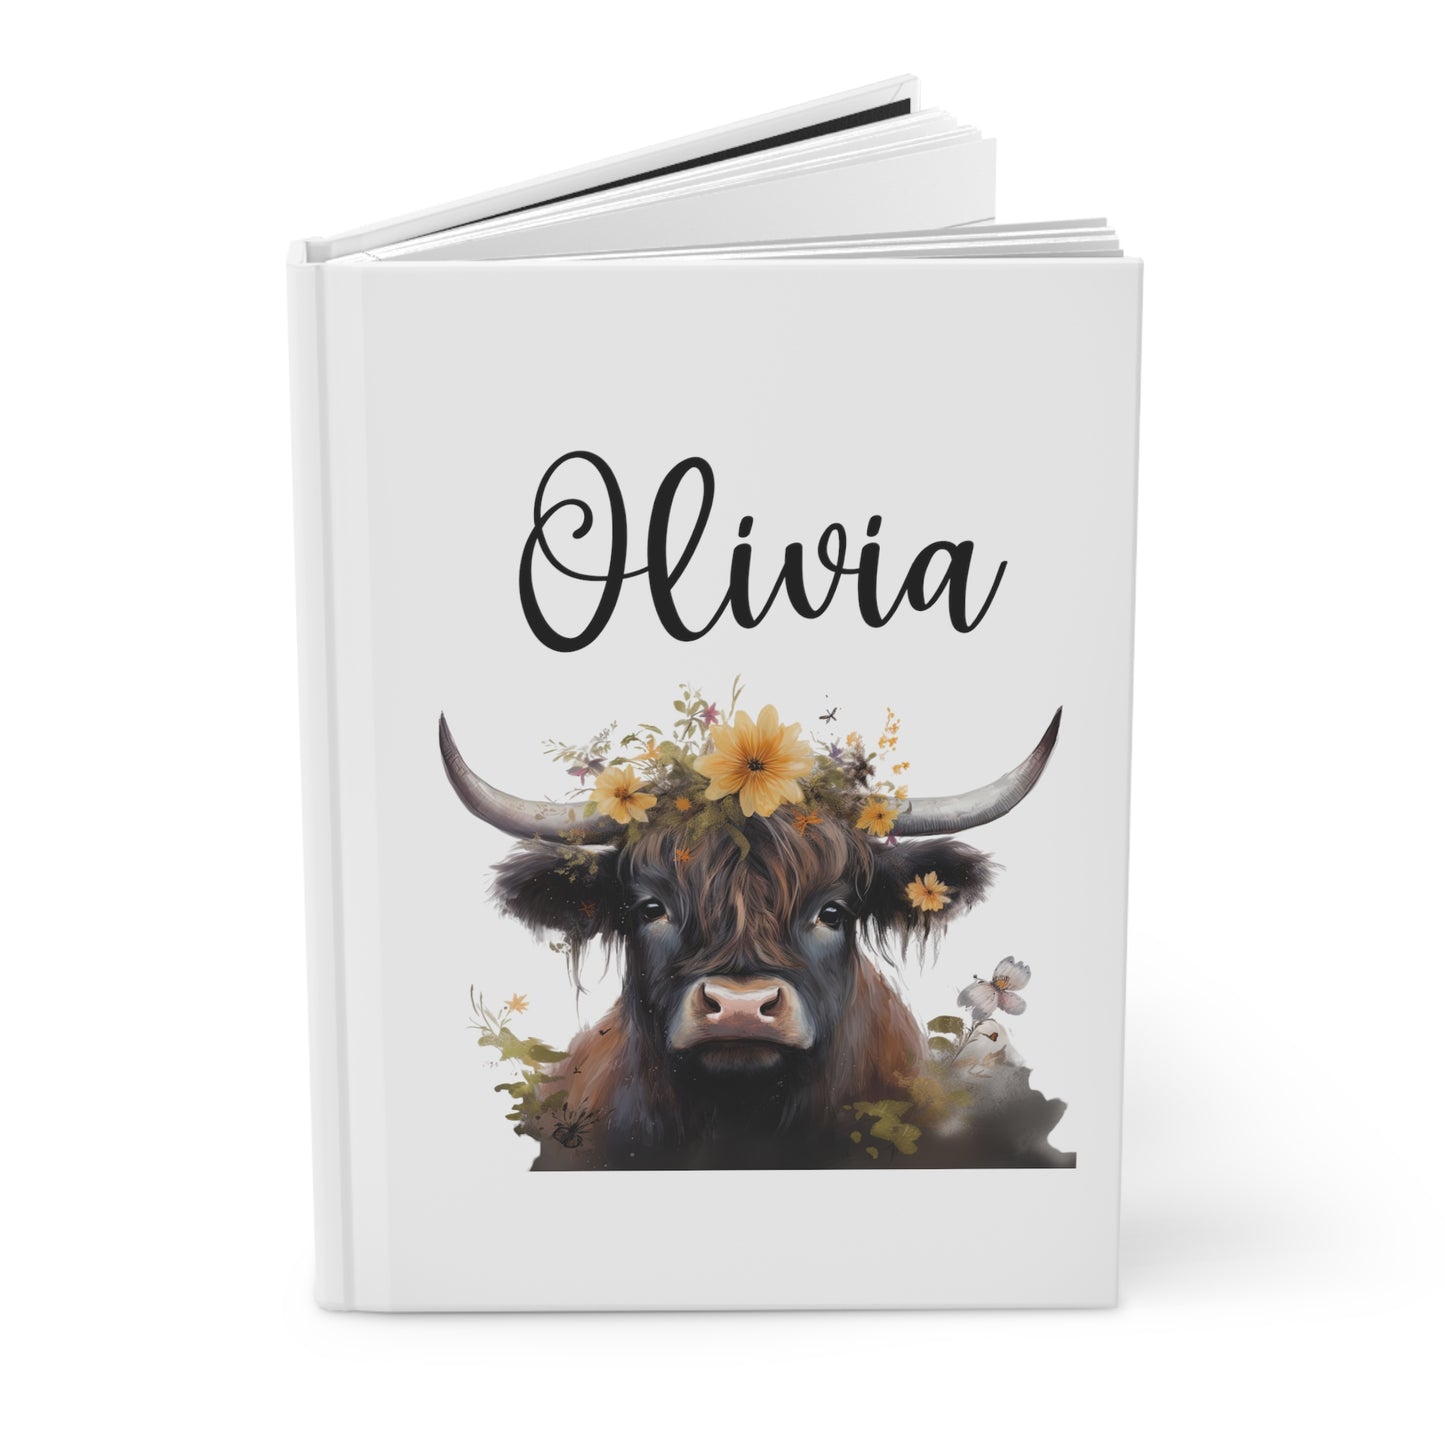 Highland Cow Journal / Personalized Journal